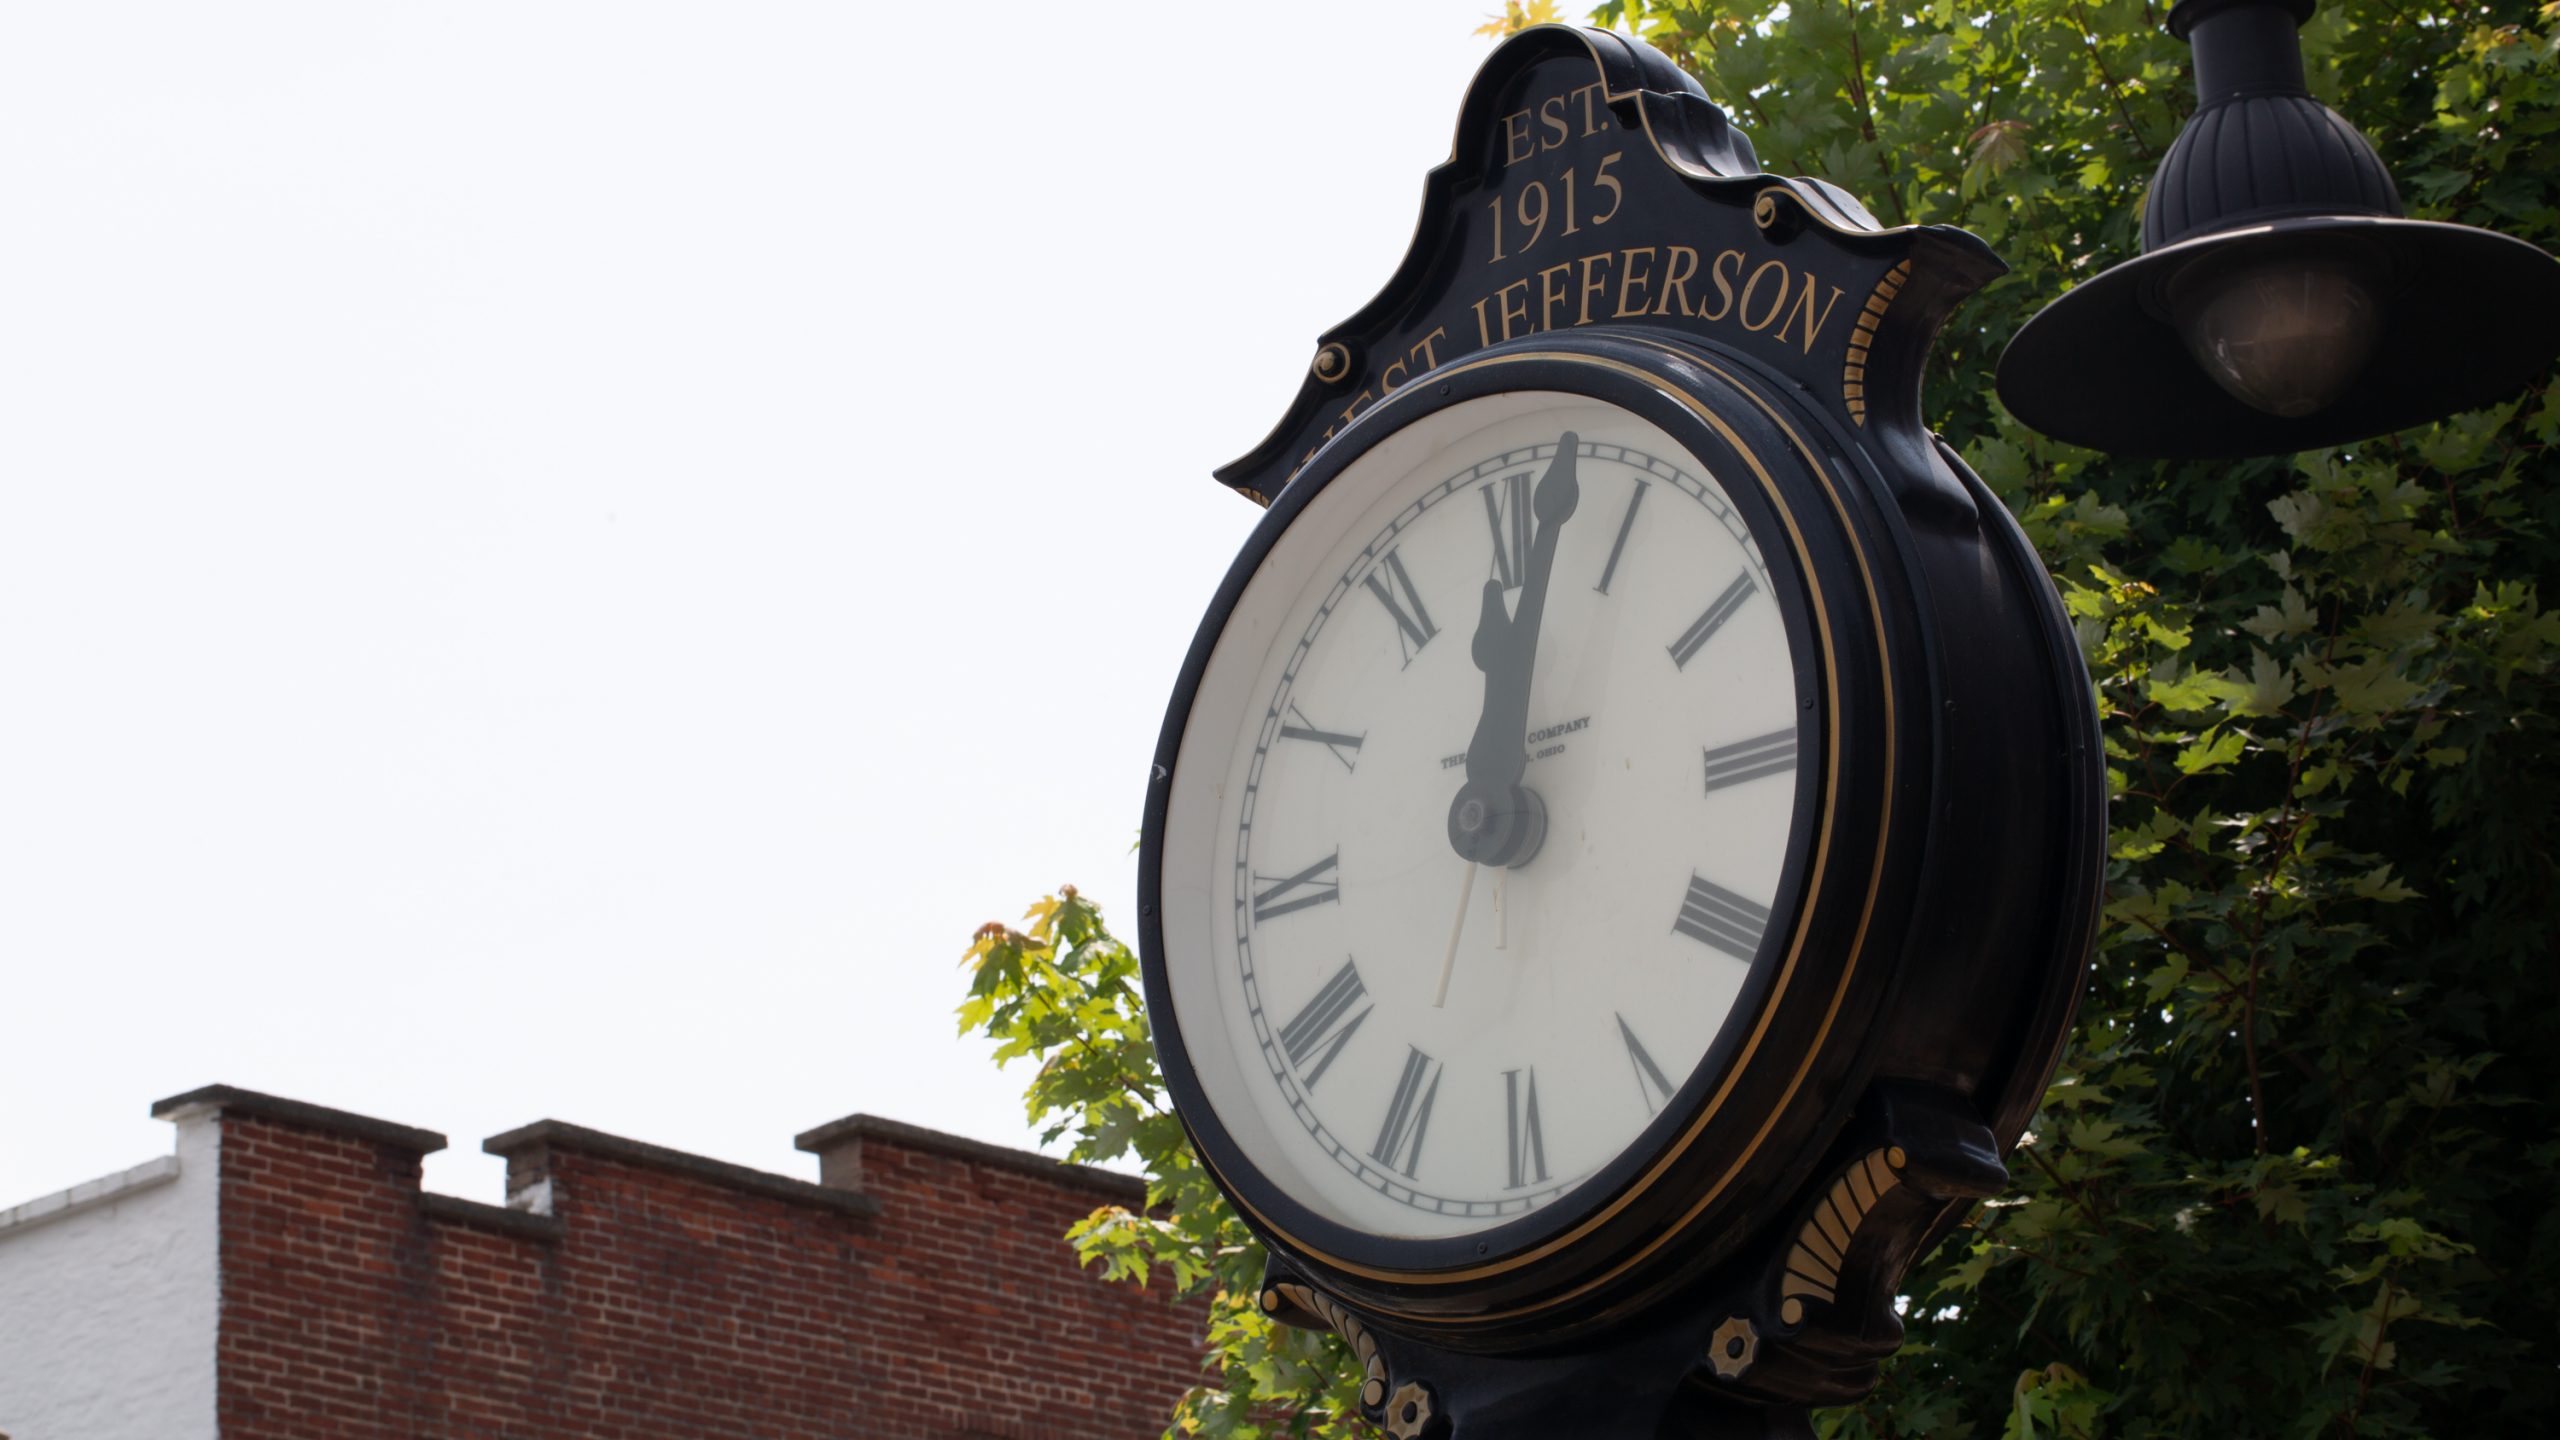 A clock points to 12:03 in a town square